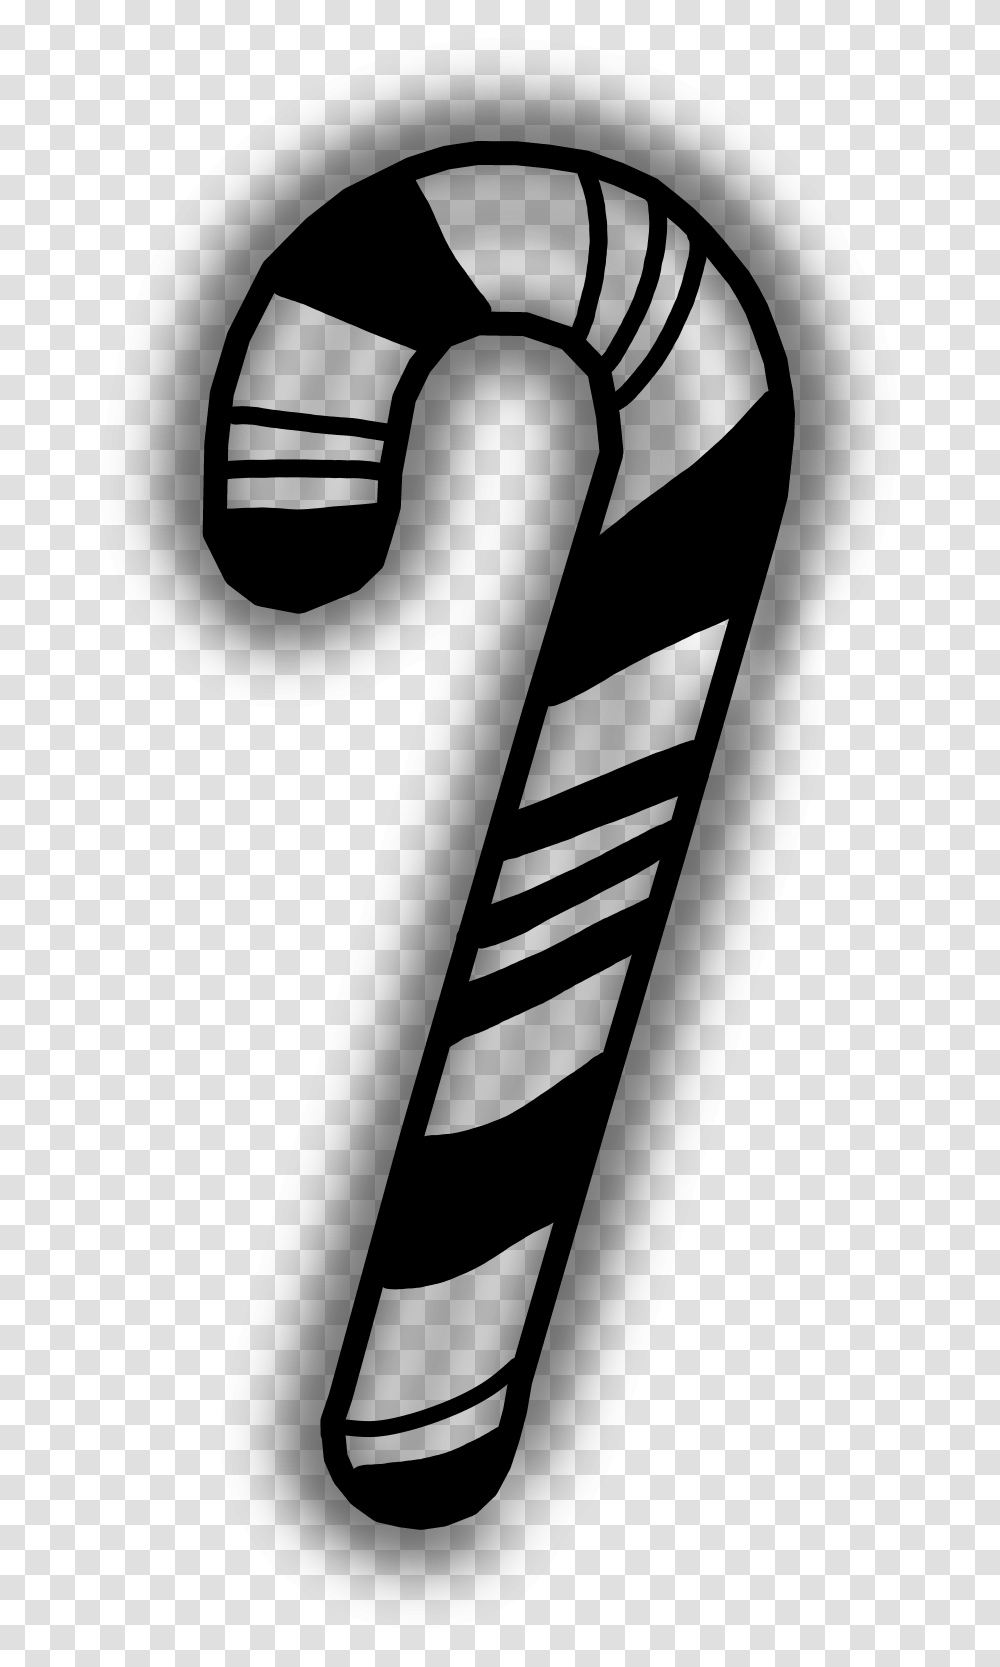 Neon Christmas Candy Candycane Decoration Black Candy Cane, Gray Transparent Png